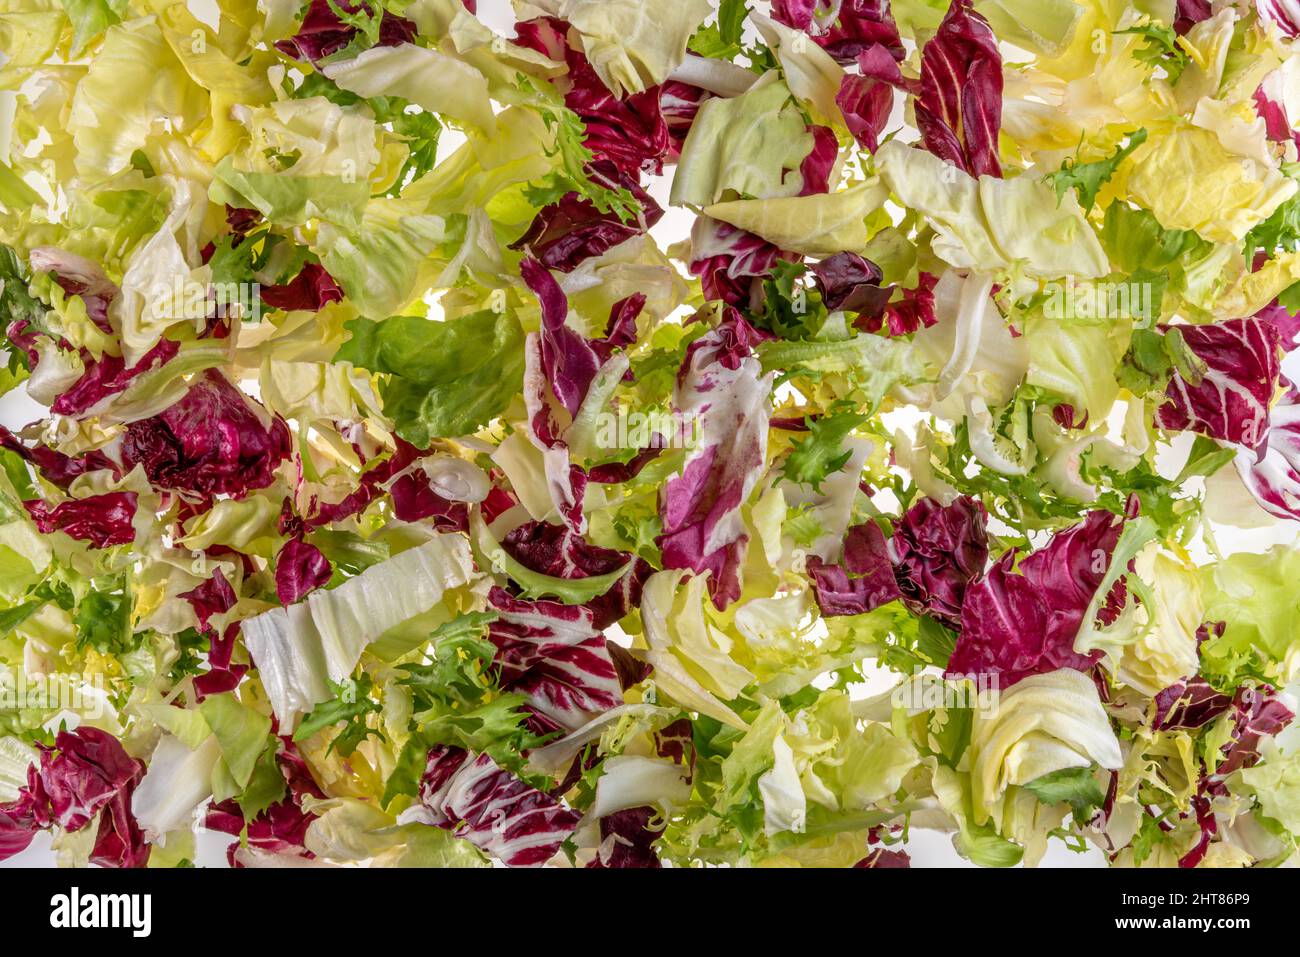 Mixed salad background, leaves lettuce, frisee, lamb lettuce and radicchio in top view, banner texture Stock Photo